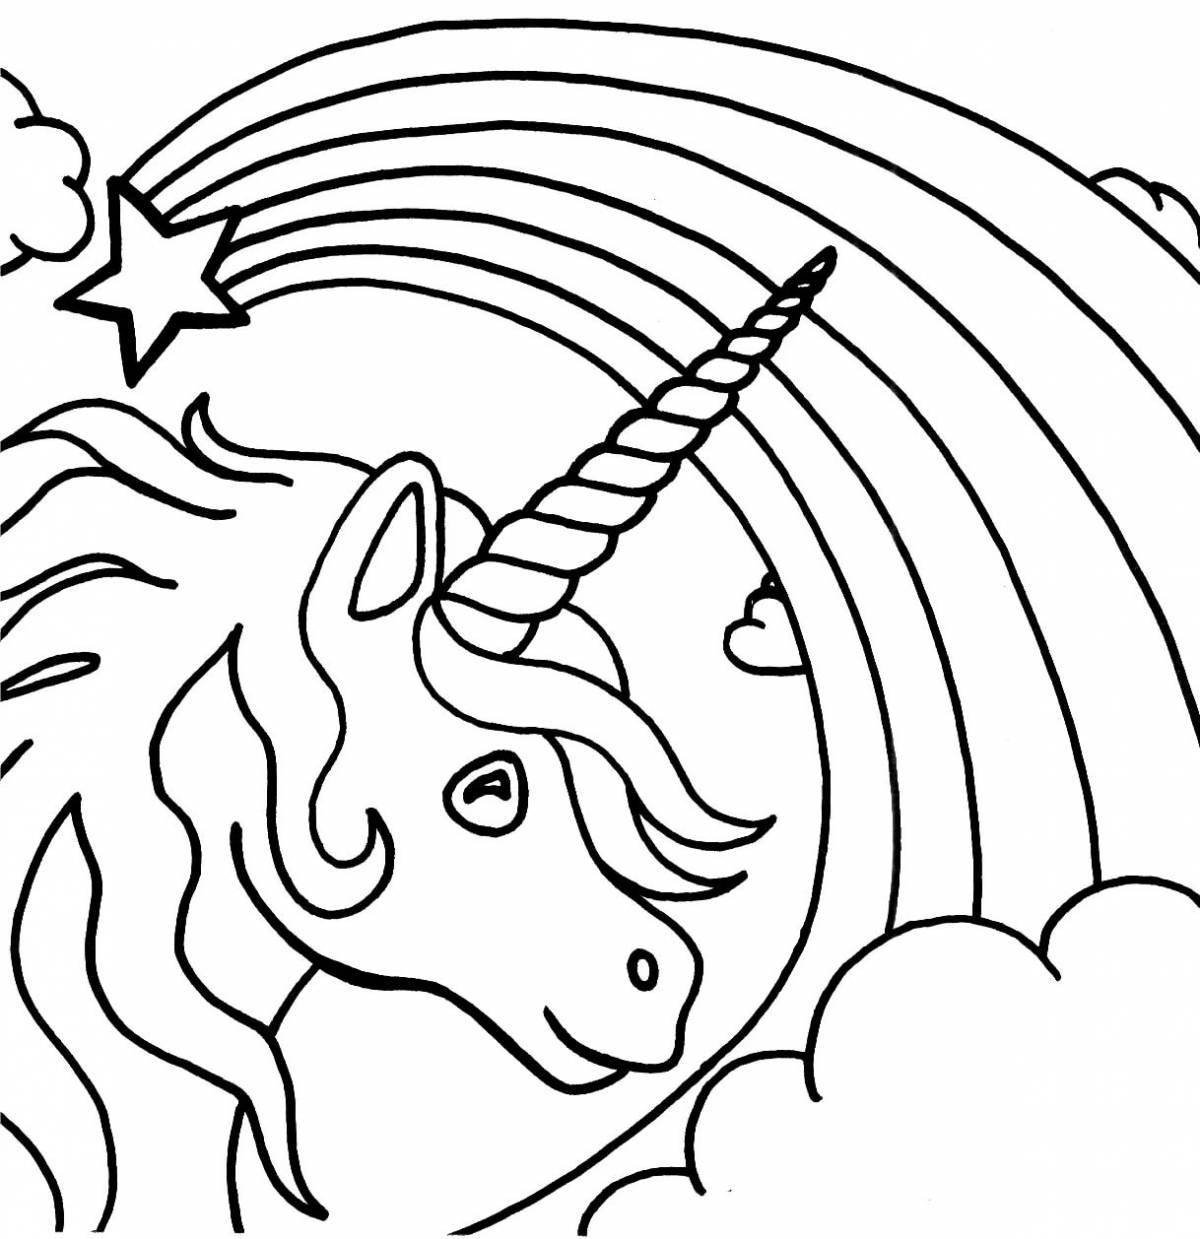 Fairytale coloring book for girls 7 years old unicorn